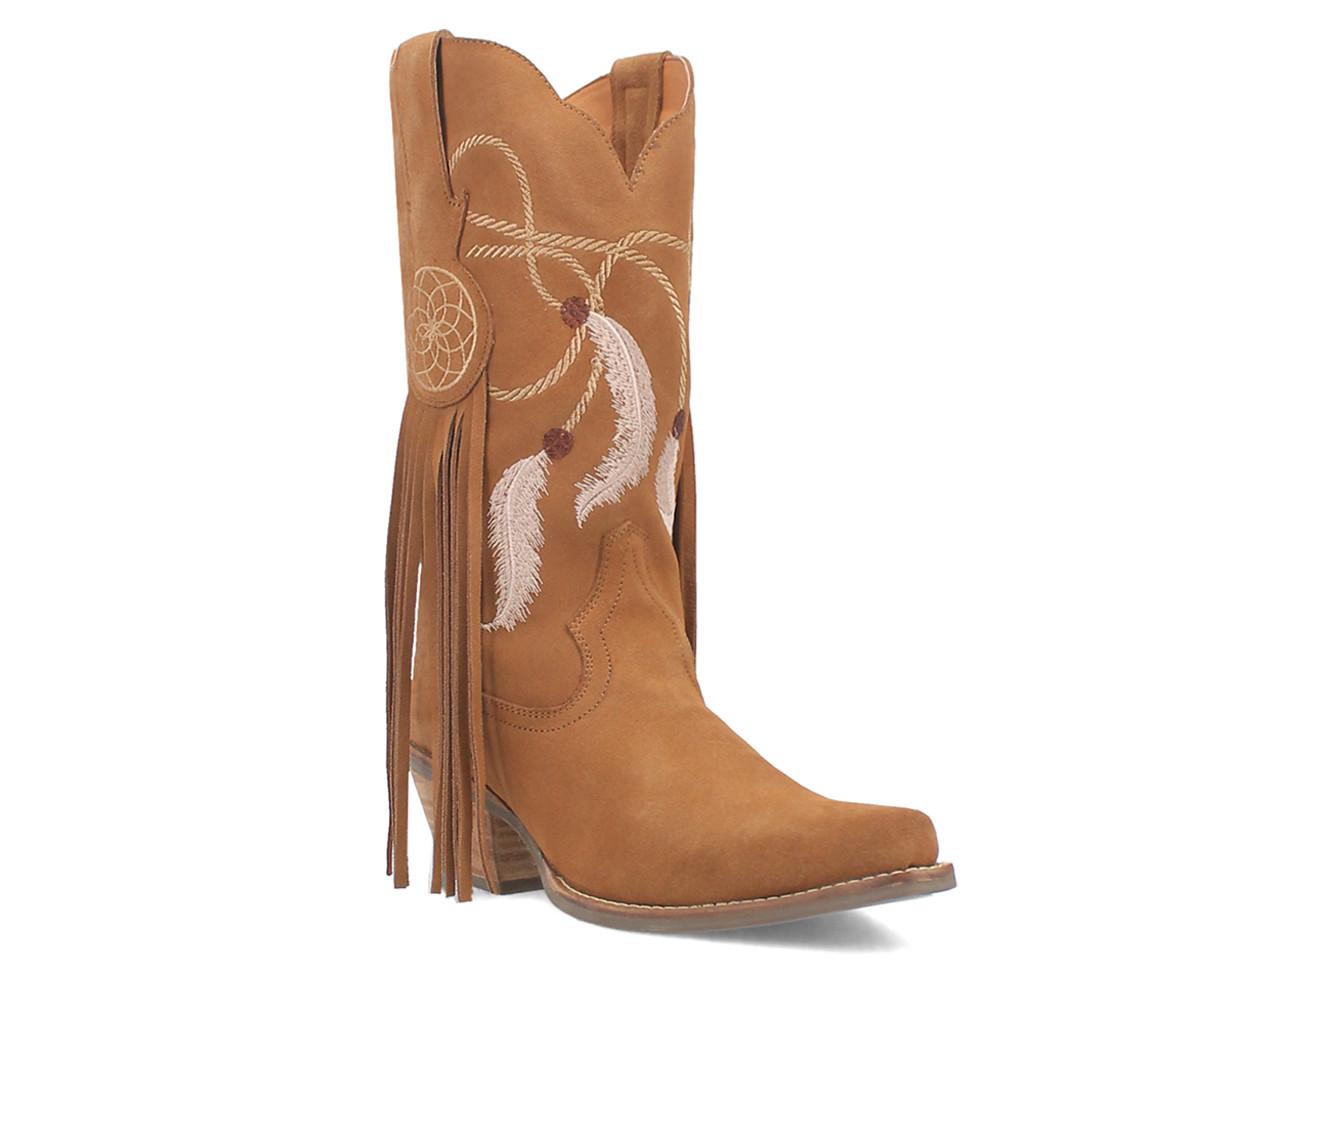 Women's Dingo Boot Day Dream Western Boots